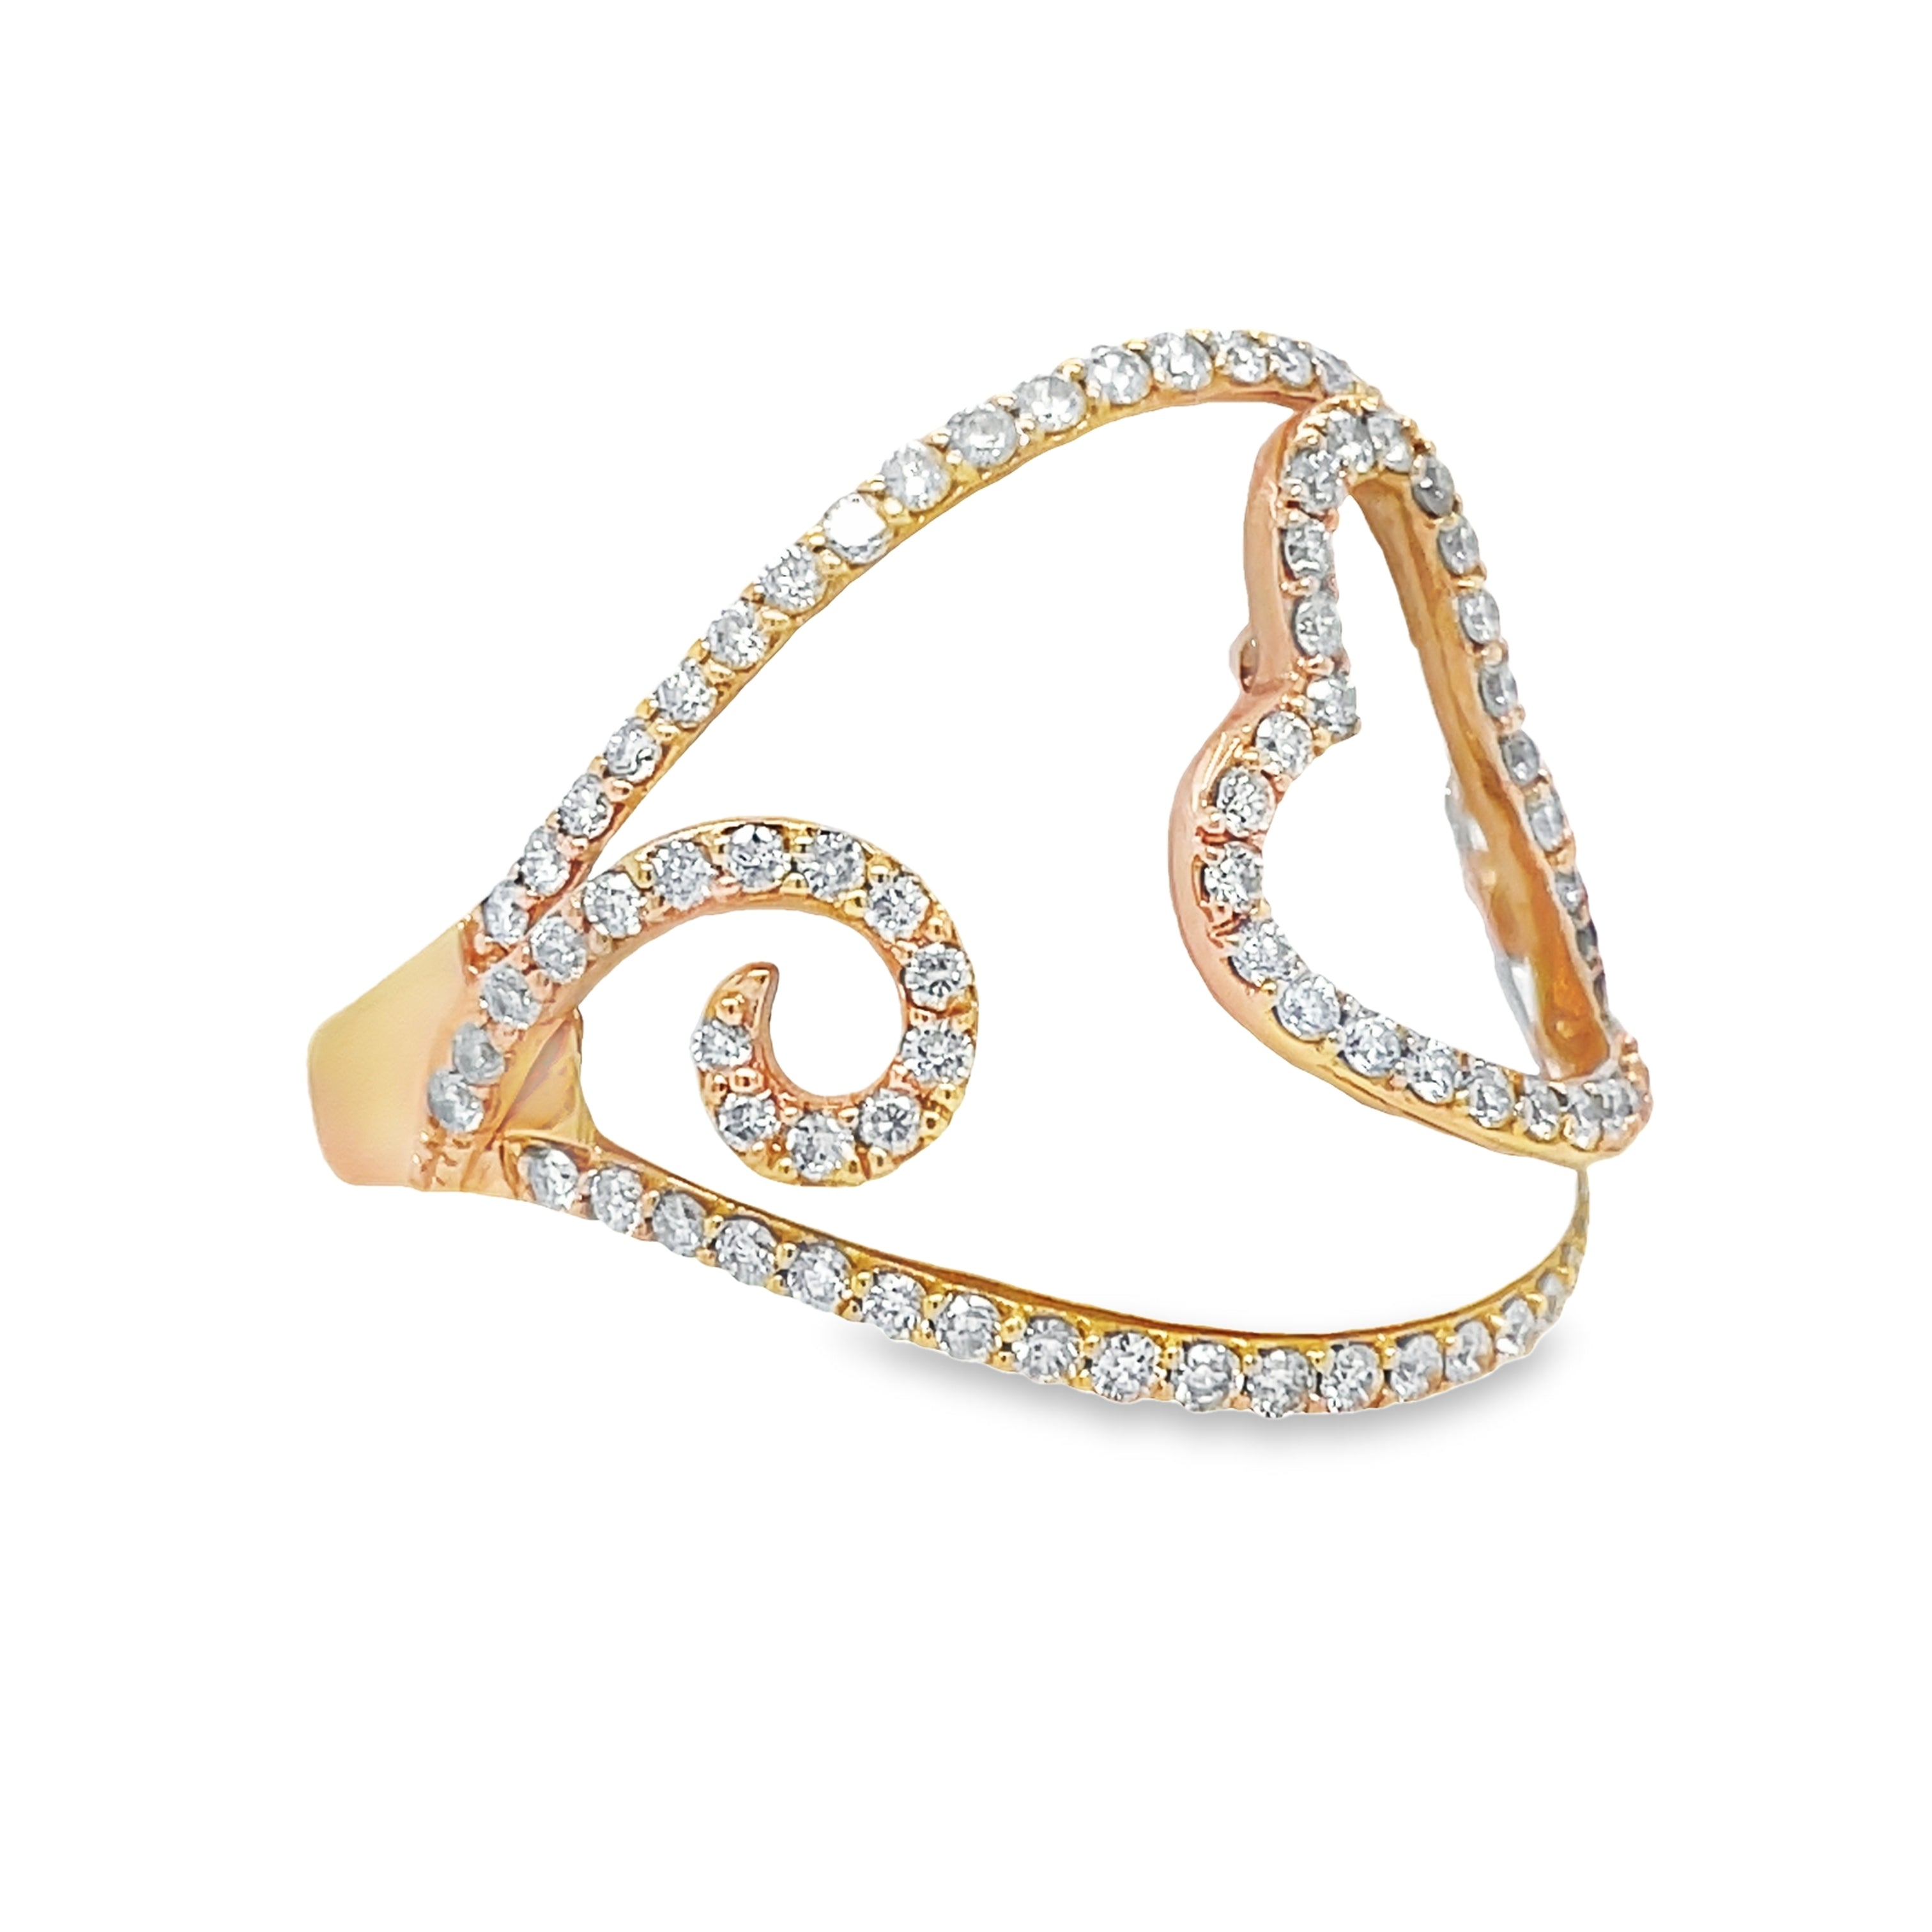 This 18K rose gold ring boasts a stunning heart cut out design and features 0.78 carats of round diamonds and a white agate stone. With a wide front measuring 19.00 mm and a tapered style, this ring is both elegant and unique. Elevate any outfit with this luxurious piece.